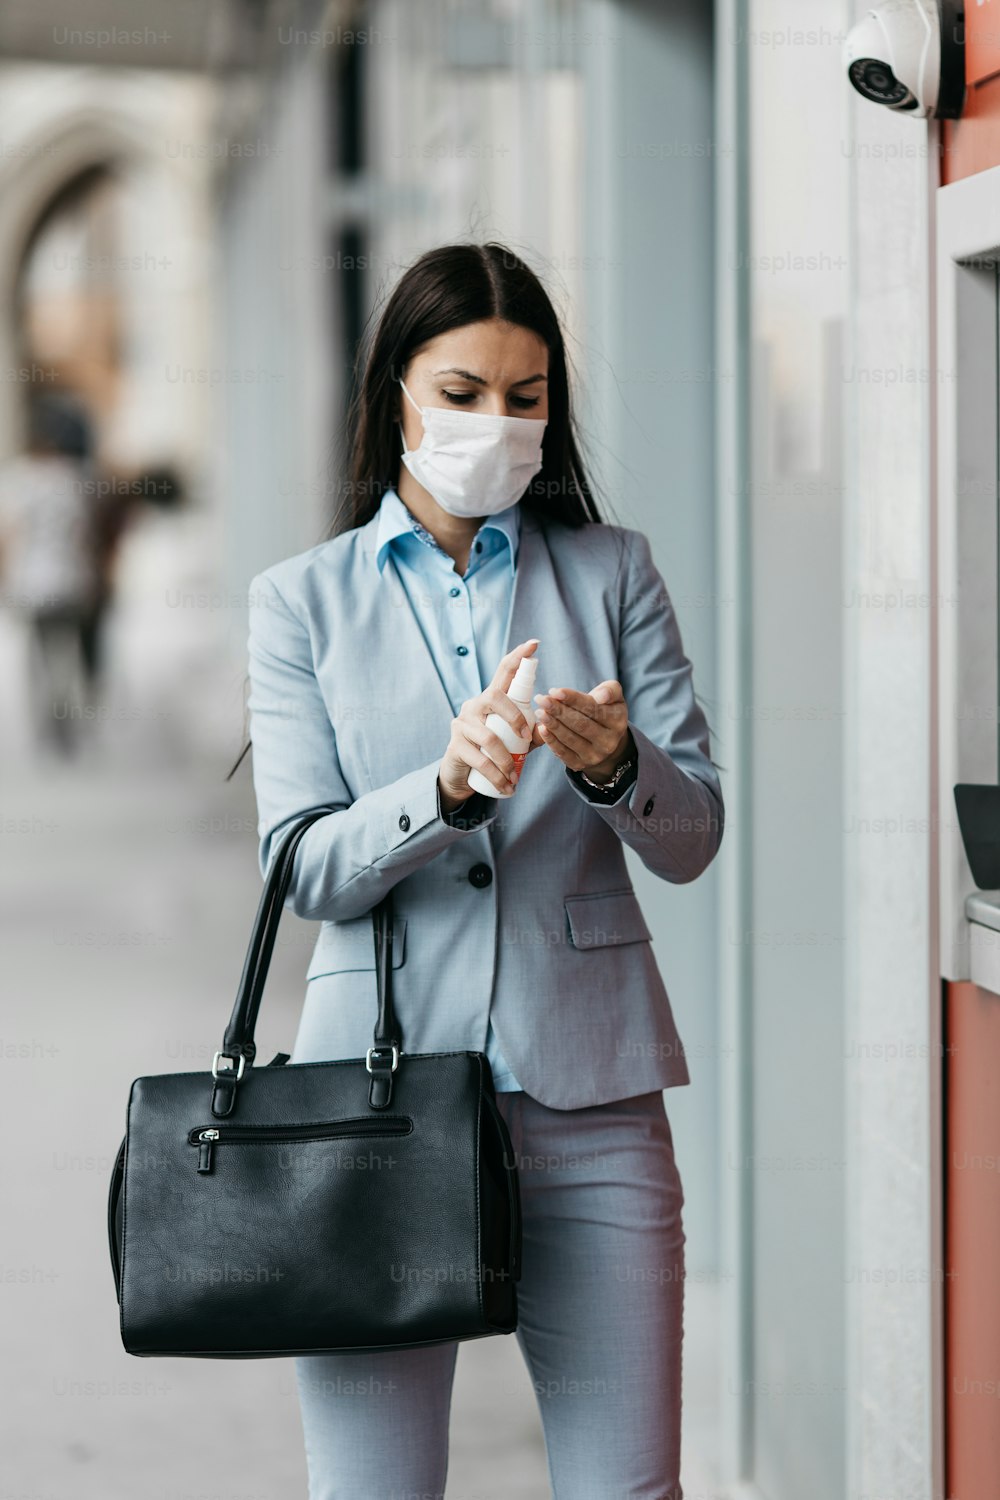 Elegant business woman with protective mask standing on city street and using ATM machine to withdraw cash. Corona or Covid-19 virus pandemic concept.